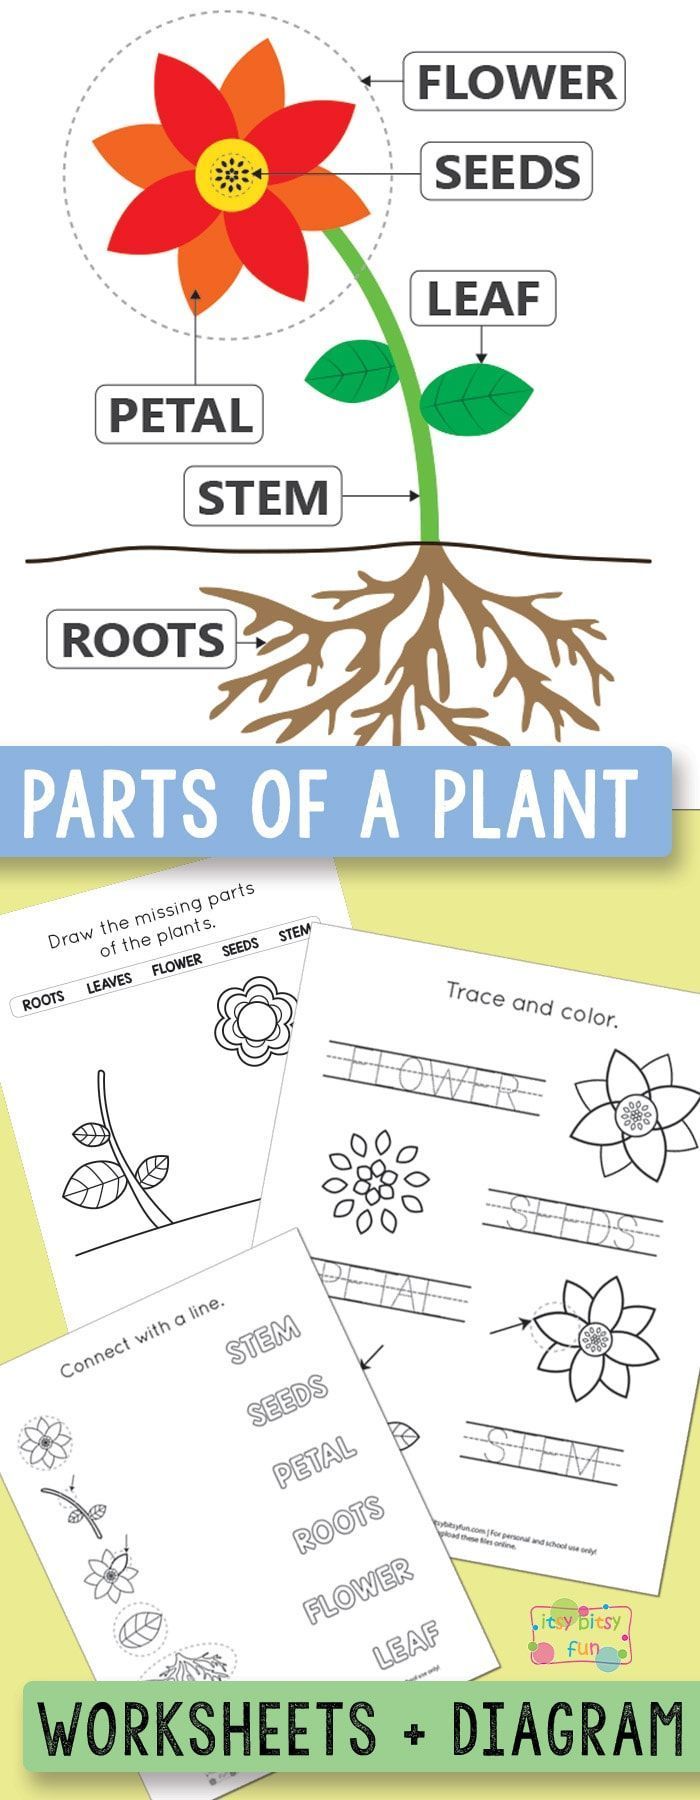 Free Printable Parts of a Plant Worksheets - Itsy Bitsy Fun -   17 planting Teaching free printable ideas